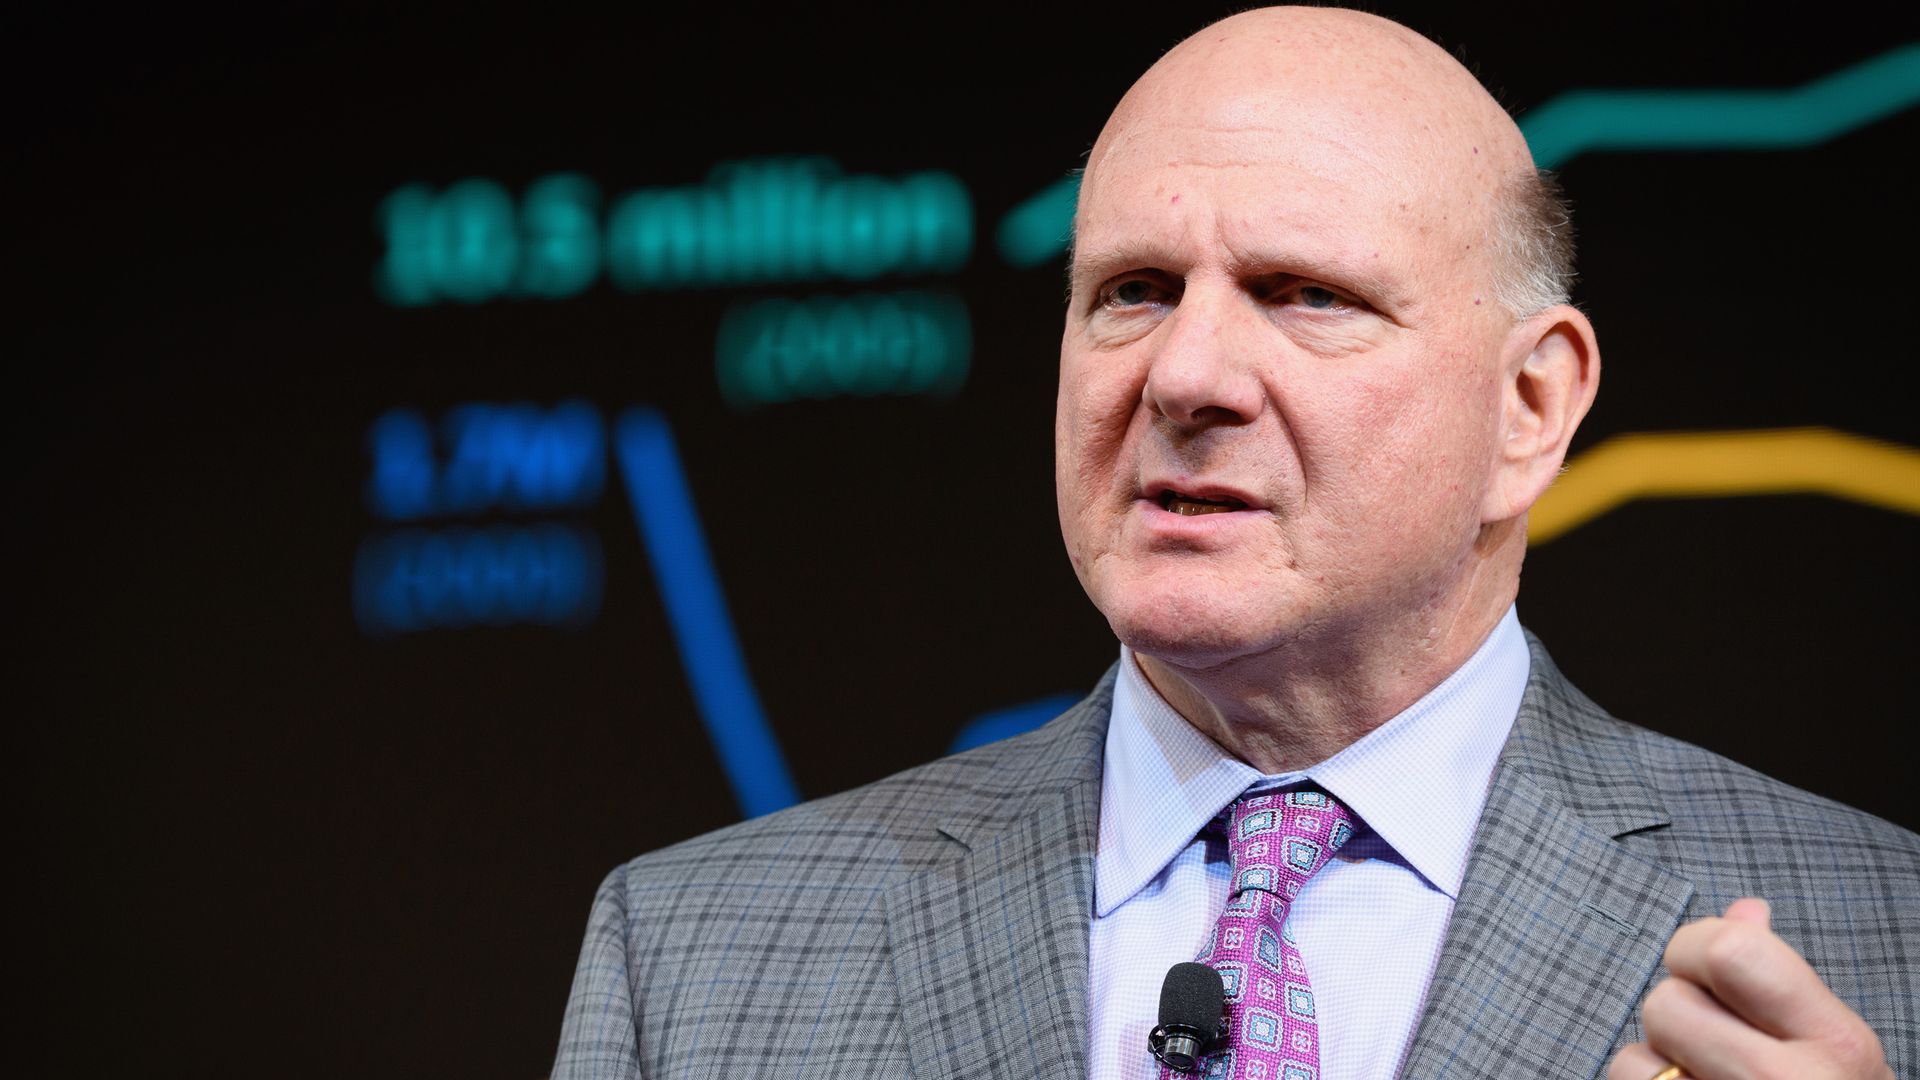 In this image, Steve Balmer speaks to an audience in a suit.